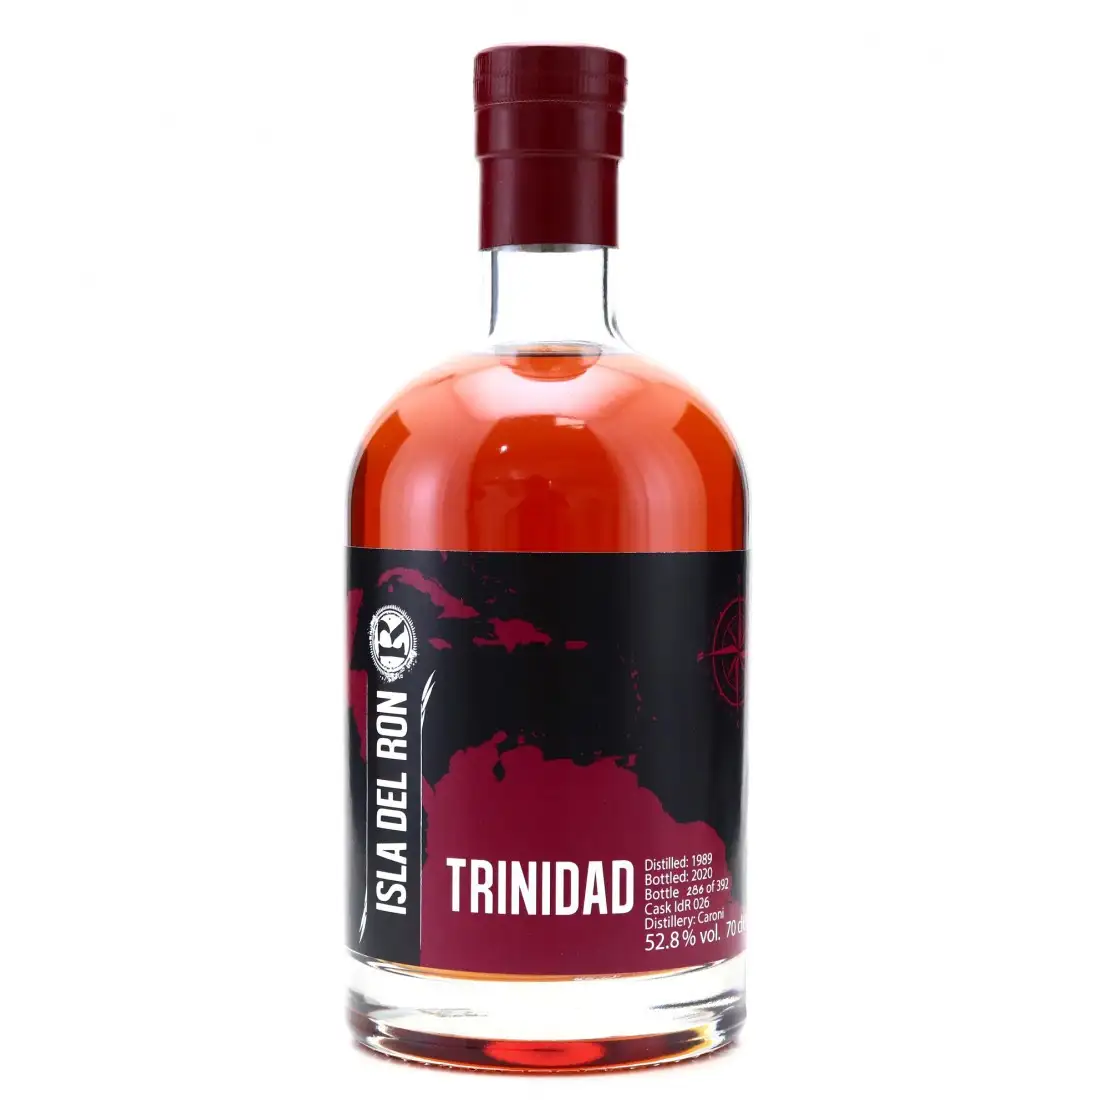 Image of the front of the bottle of the rum 1989